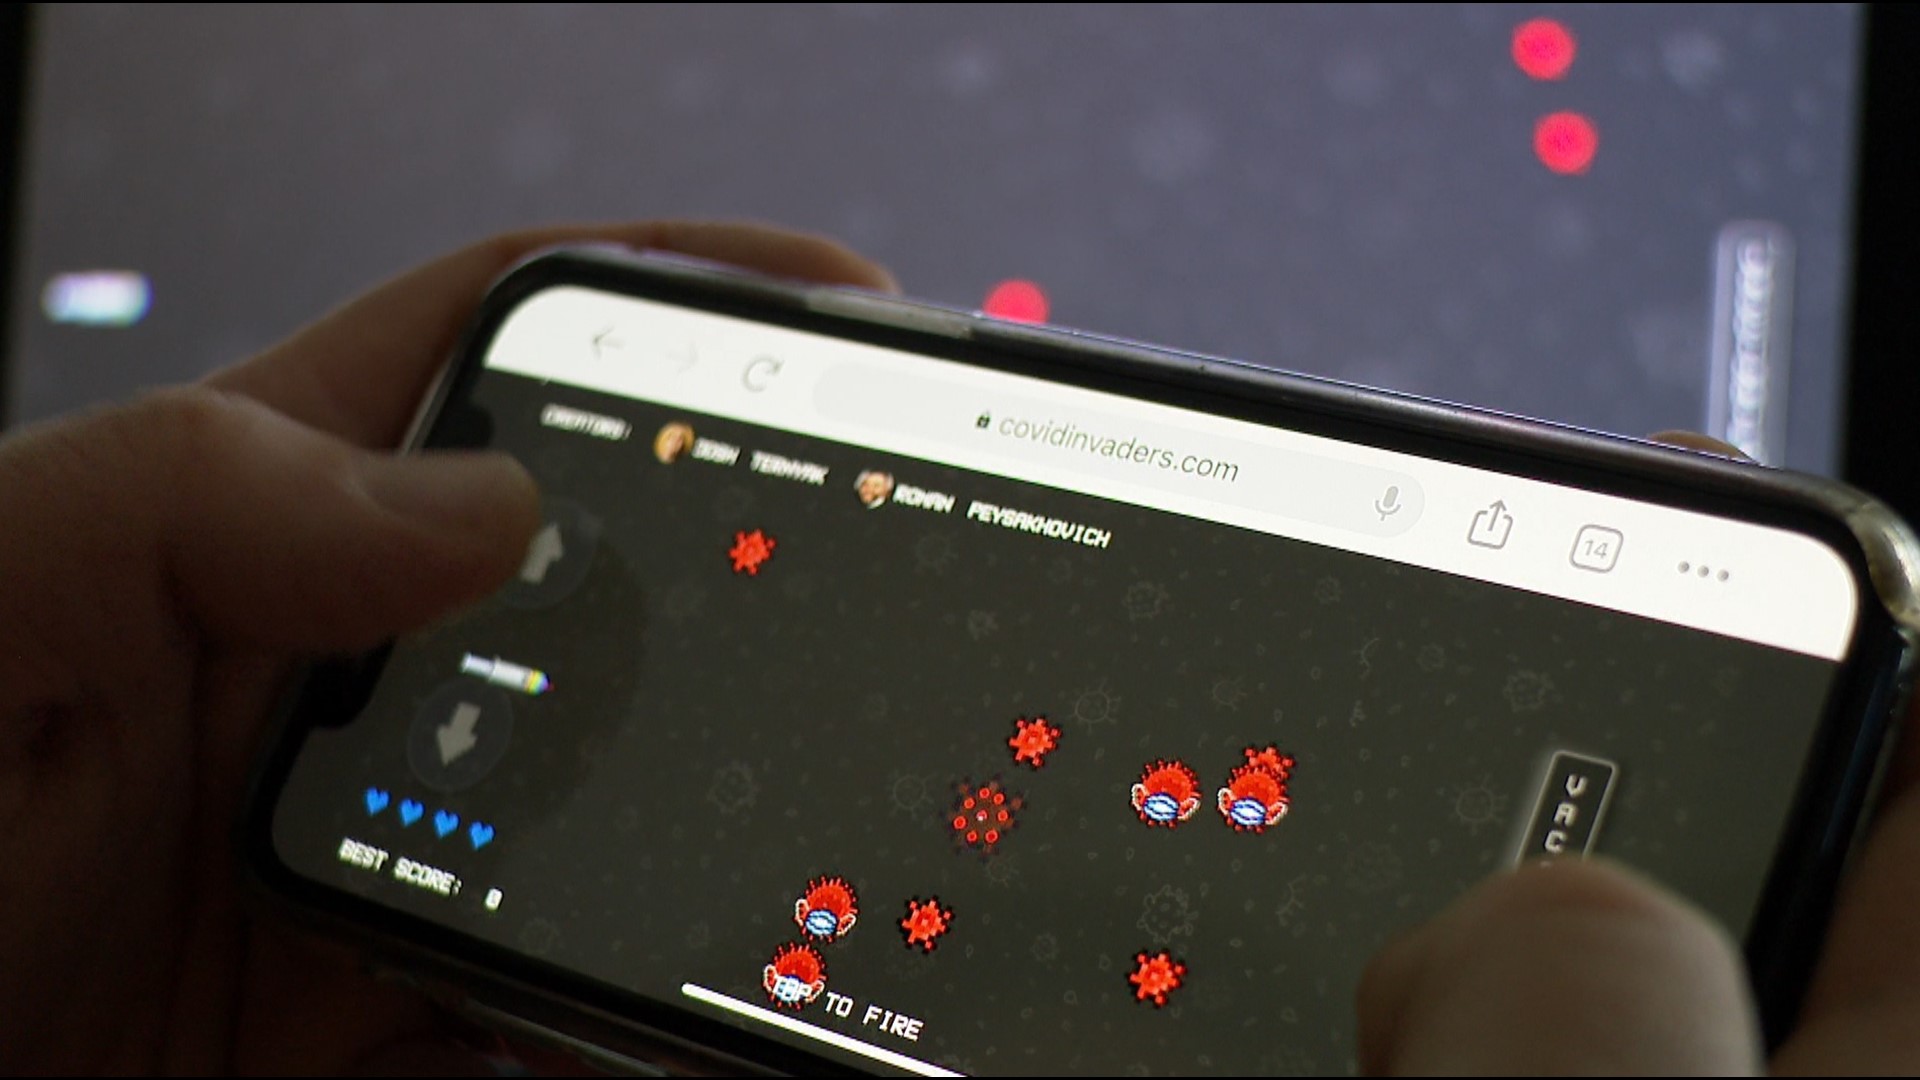 Minnesota teen Josh Ternyak created 'COVID Invaders' - a free, online video game that allows players to destroy Coronavirus with syringes of vaccine.